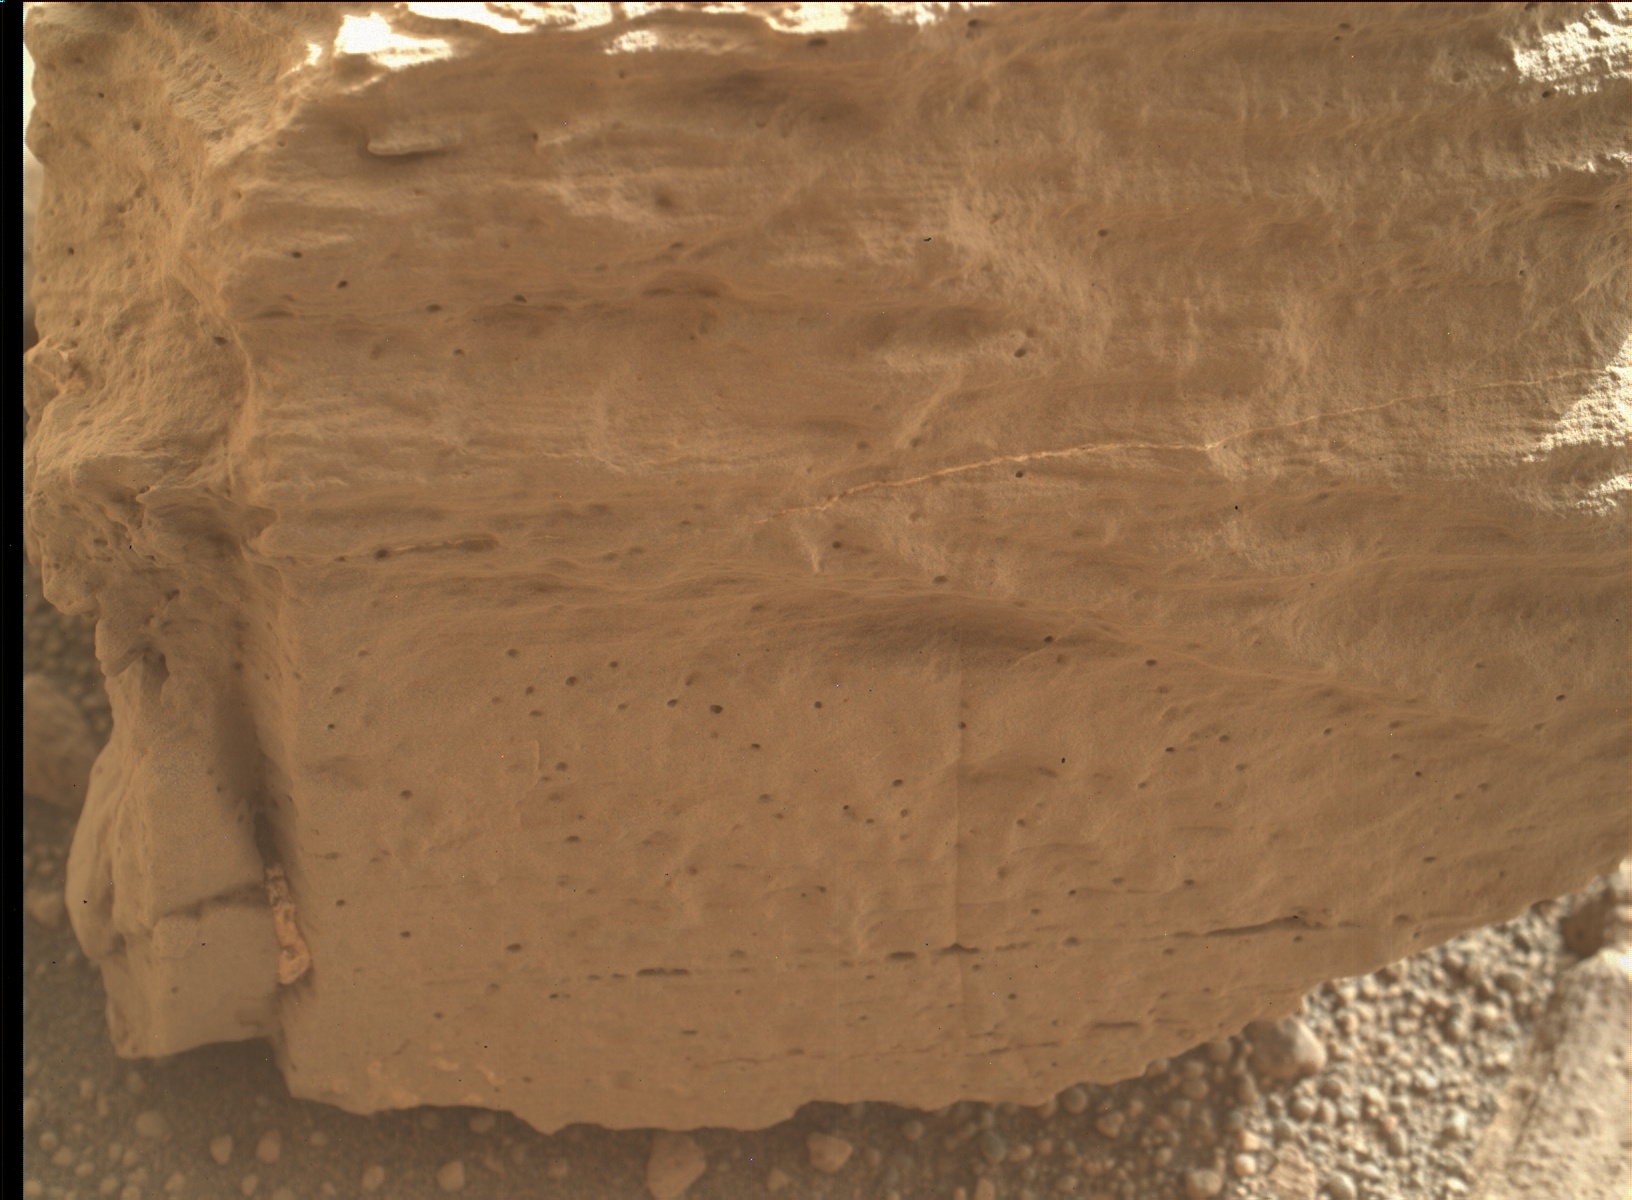 Nasa's Mars rover Curiosity acquired this image using its Mars Hand Lens Imager (MAHLI) on Sol 1436